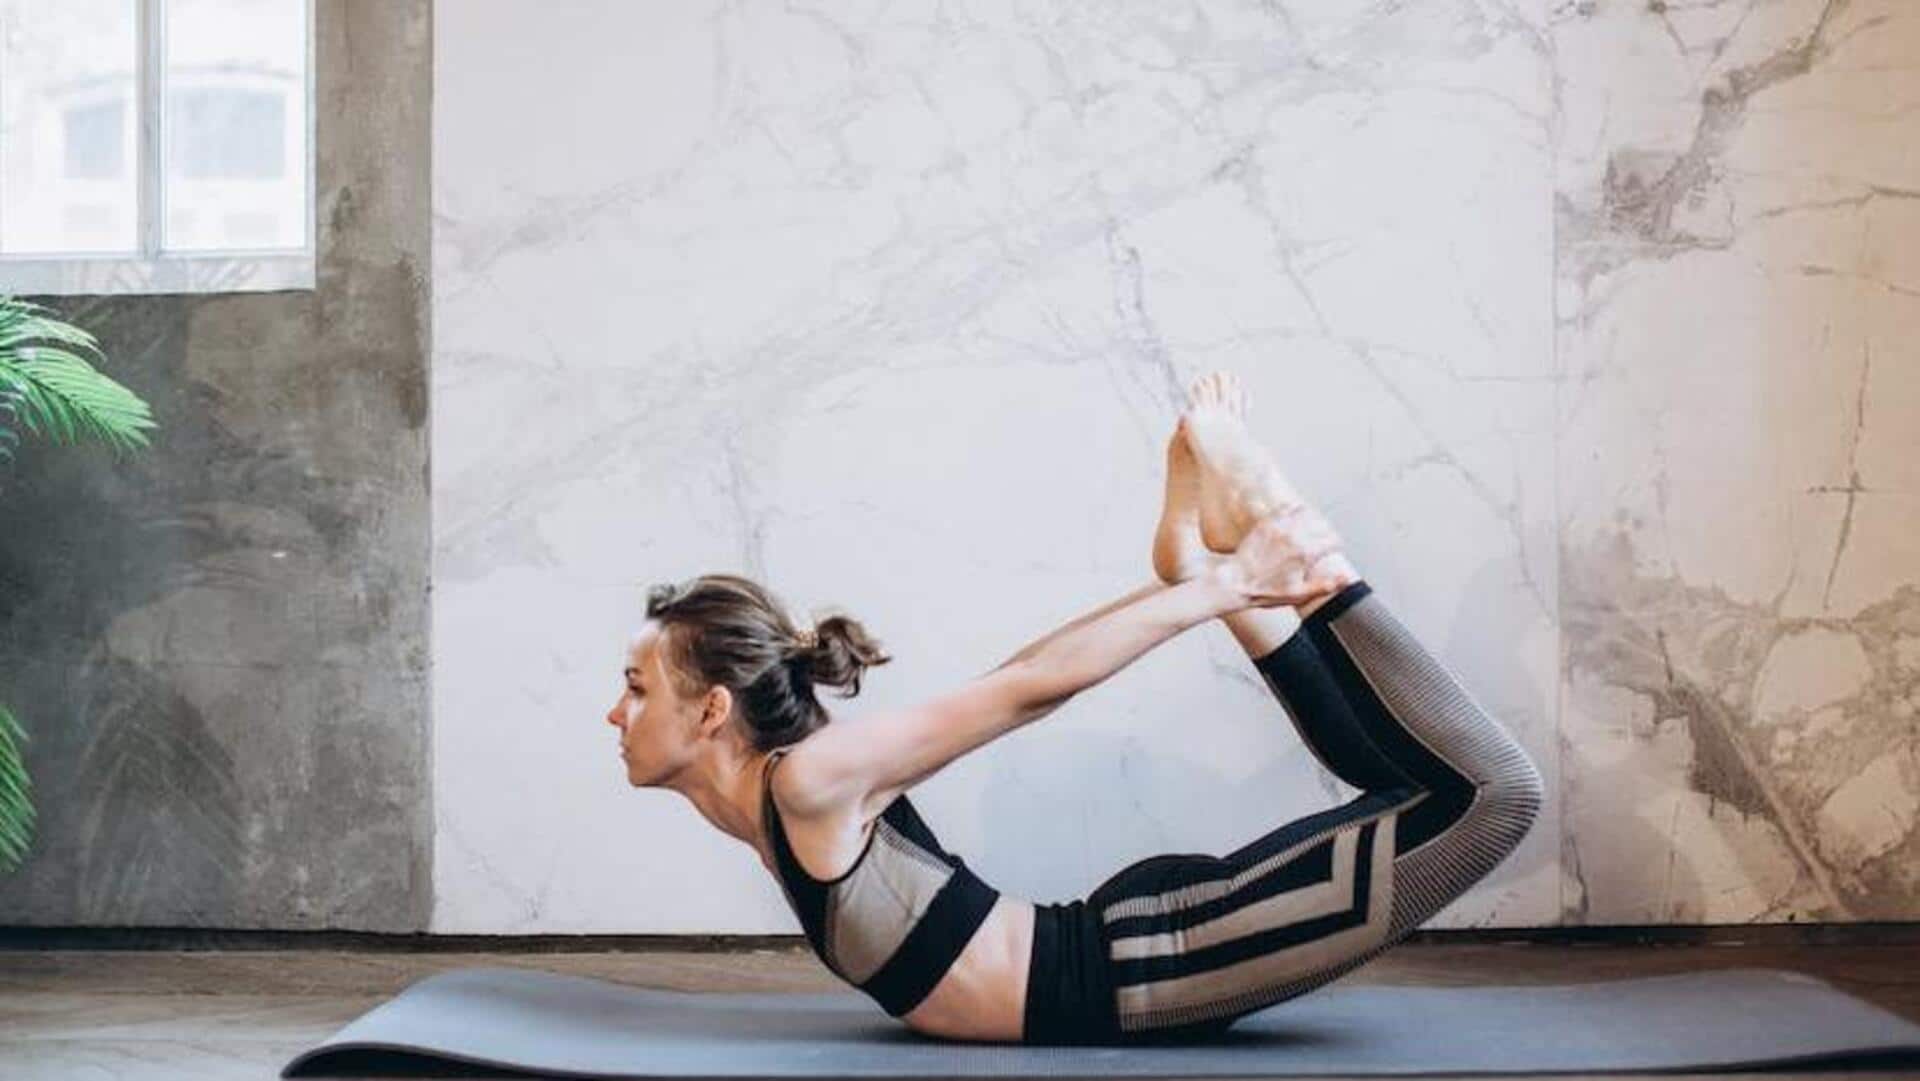 Dhanurasana or Bow Pose is energetic and stimulates the adrenal glands,  which can help you battle exhaustion like all backbends do. Your ... |  Instagram